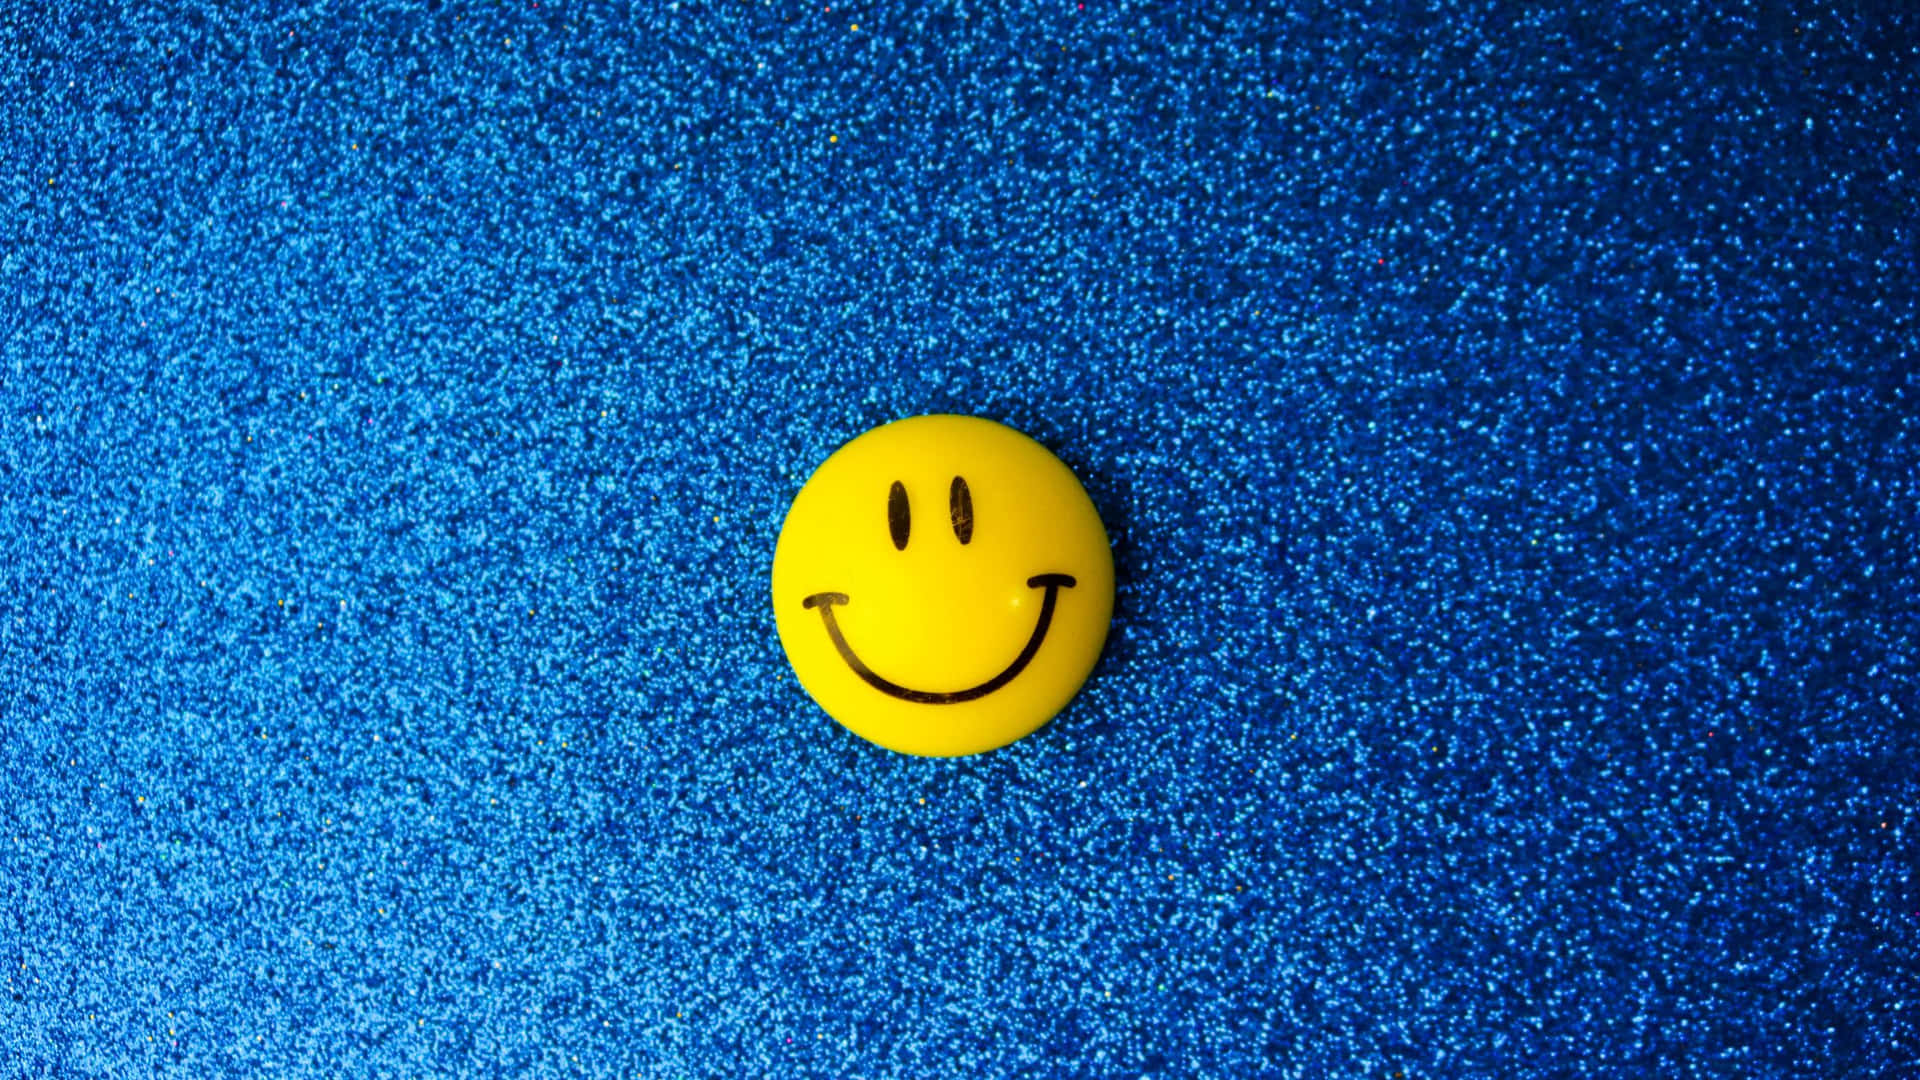 Smile Happy IPhone Wallpaper  IPhone Wallpapers  iPhone Wallpapers